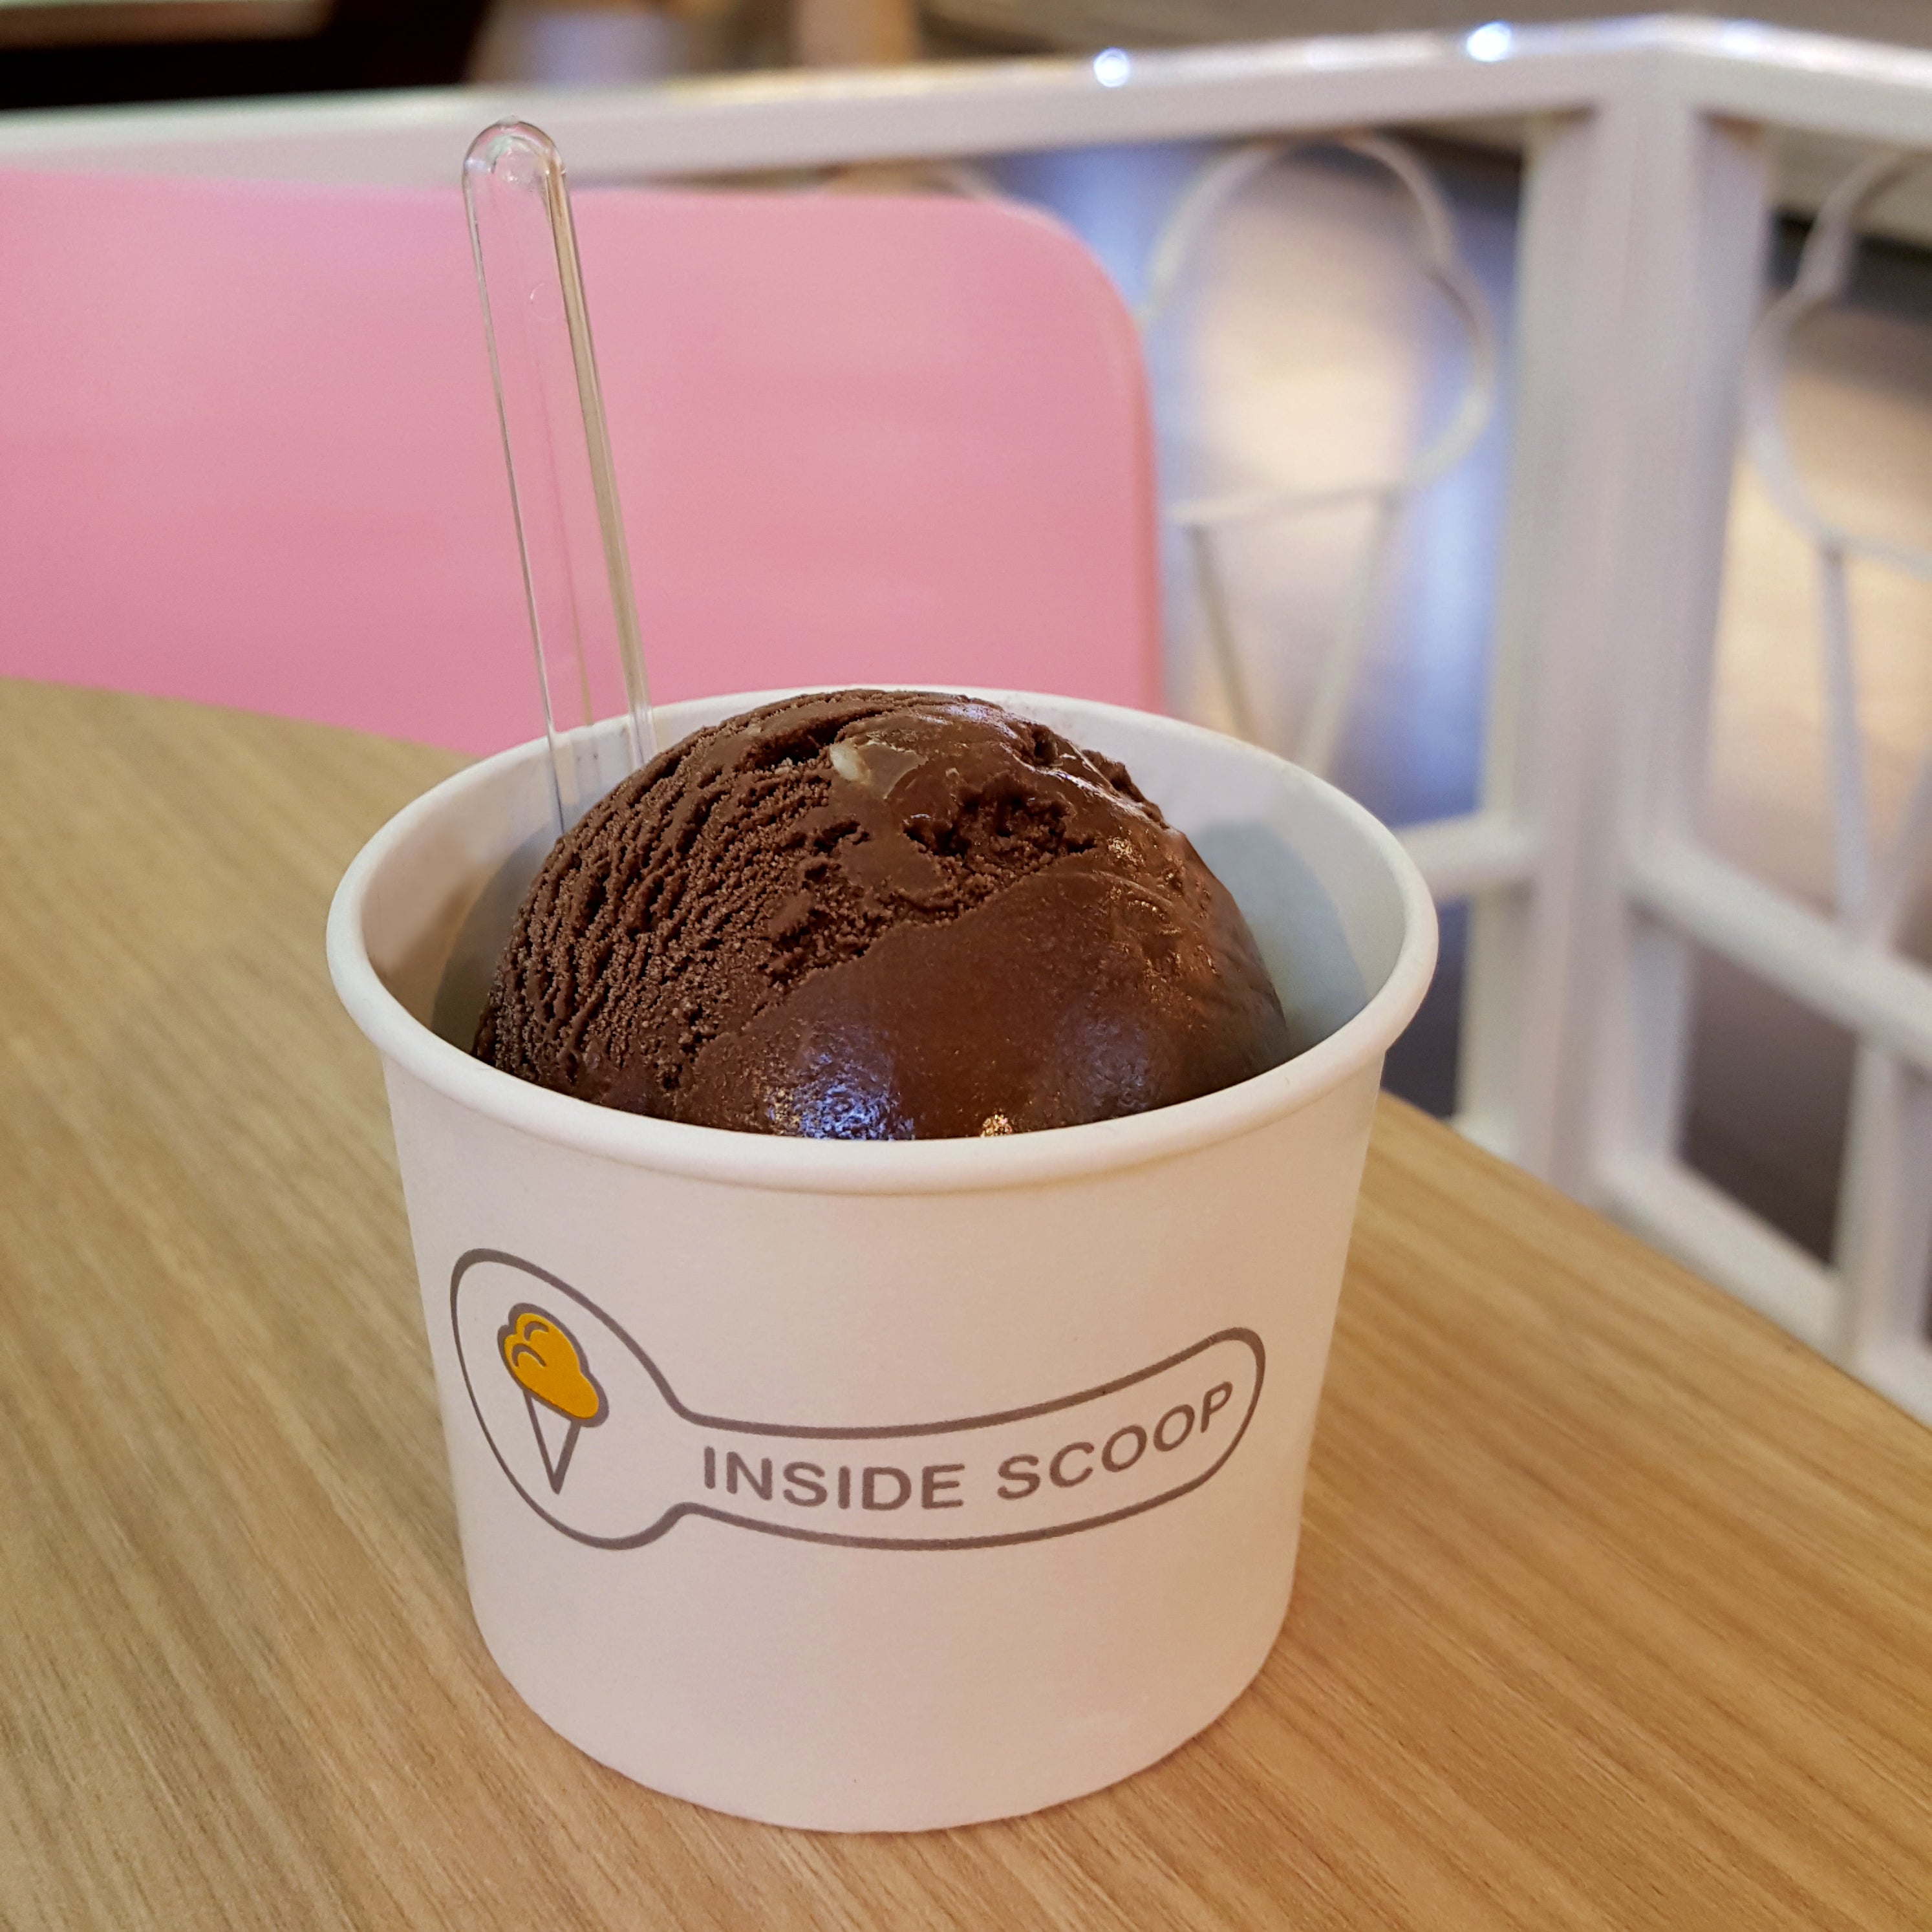 Inside Scoop is Now in Gardens Mall and They're Selling One Scoop for RM3! - World Of Buzz 3